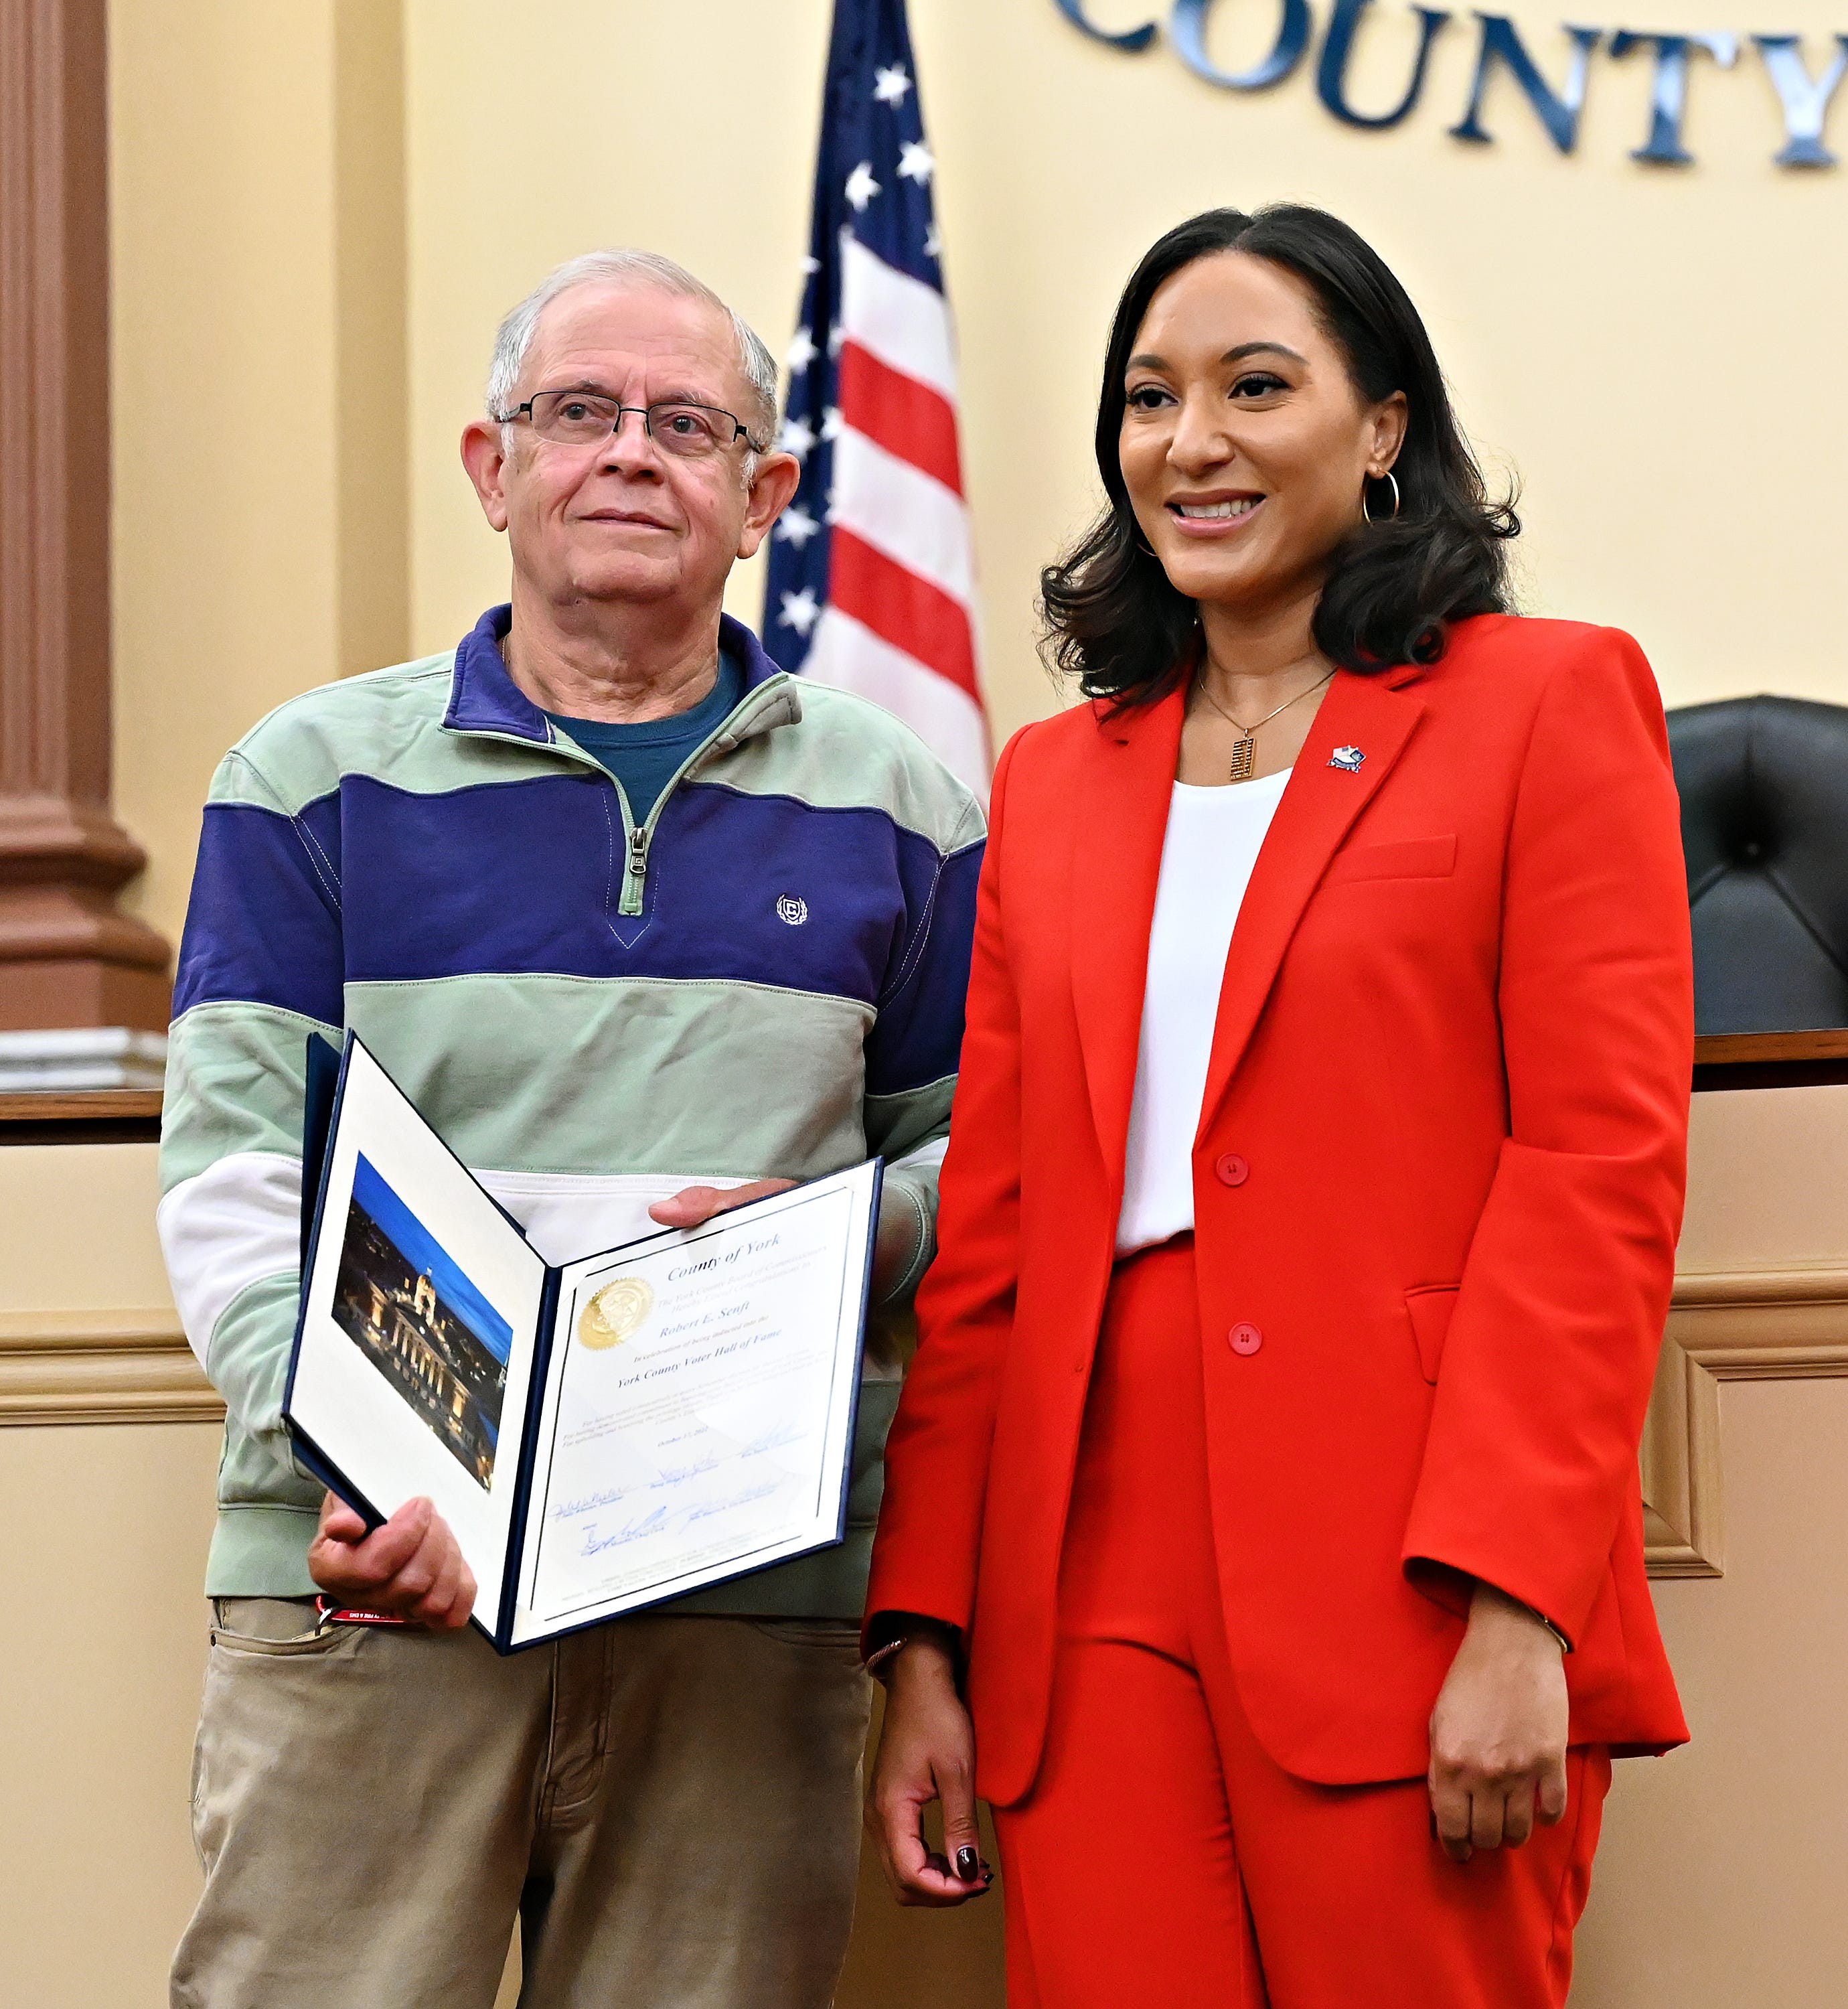 Robert Senft, left, of Spring Garden Township, is photographed with Acting Secretary of State Leigh Chapman following a ceremony held to induct five York County residents into the Pennsylvania Voter Hall of Fame at York County Administrative Center in York City, Monday, Oct. 17, 2022. Recipients have voted in at least 50 consecutive general elections. Dawn J. Sagert/The York Dispatch